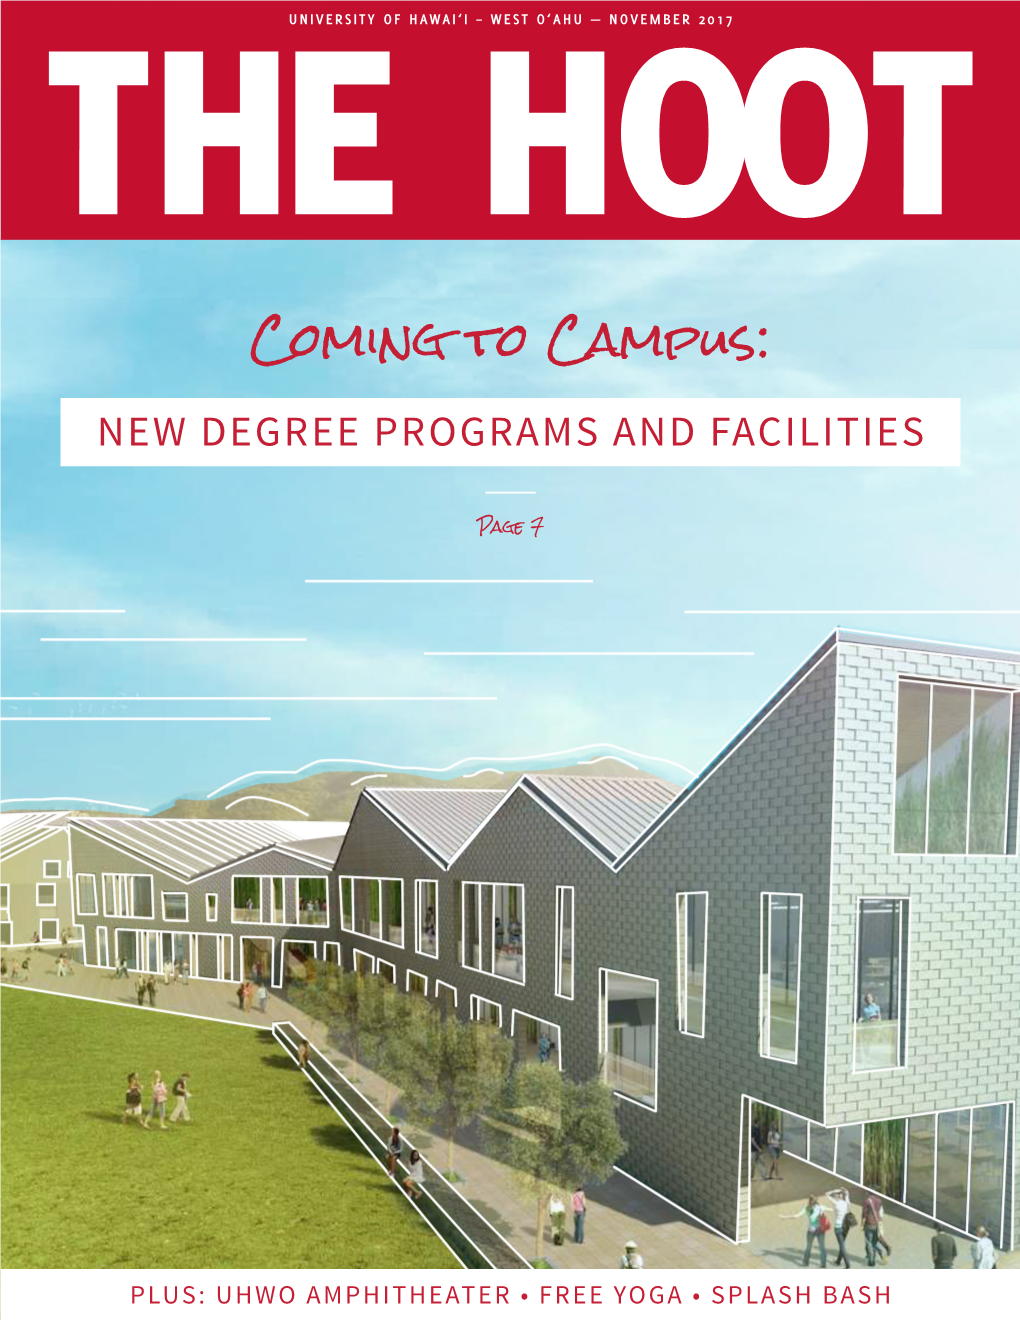 Coming to Campus: NEW DEGREE PROGRAMS and FACILITIES